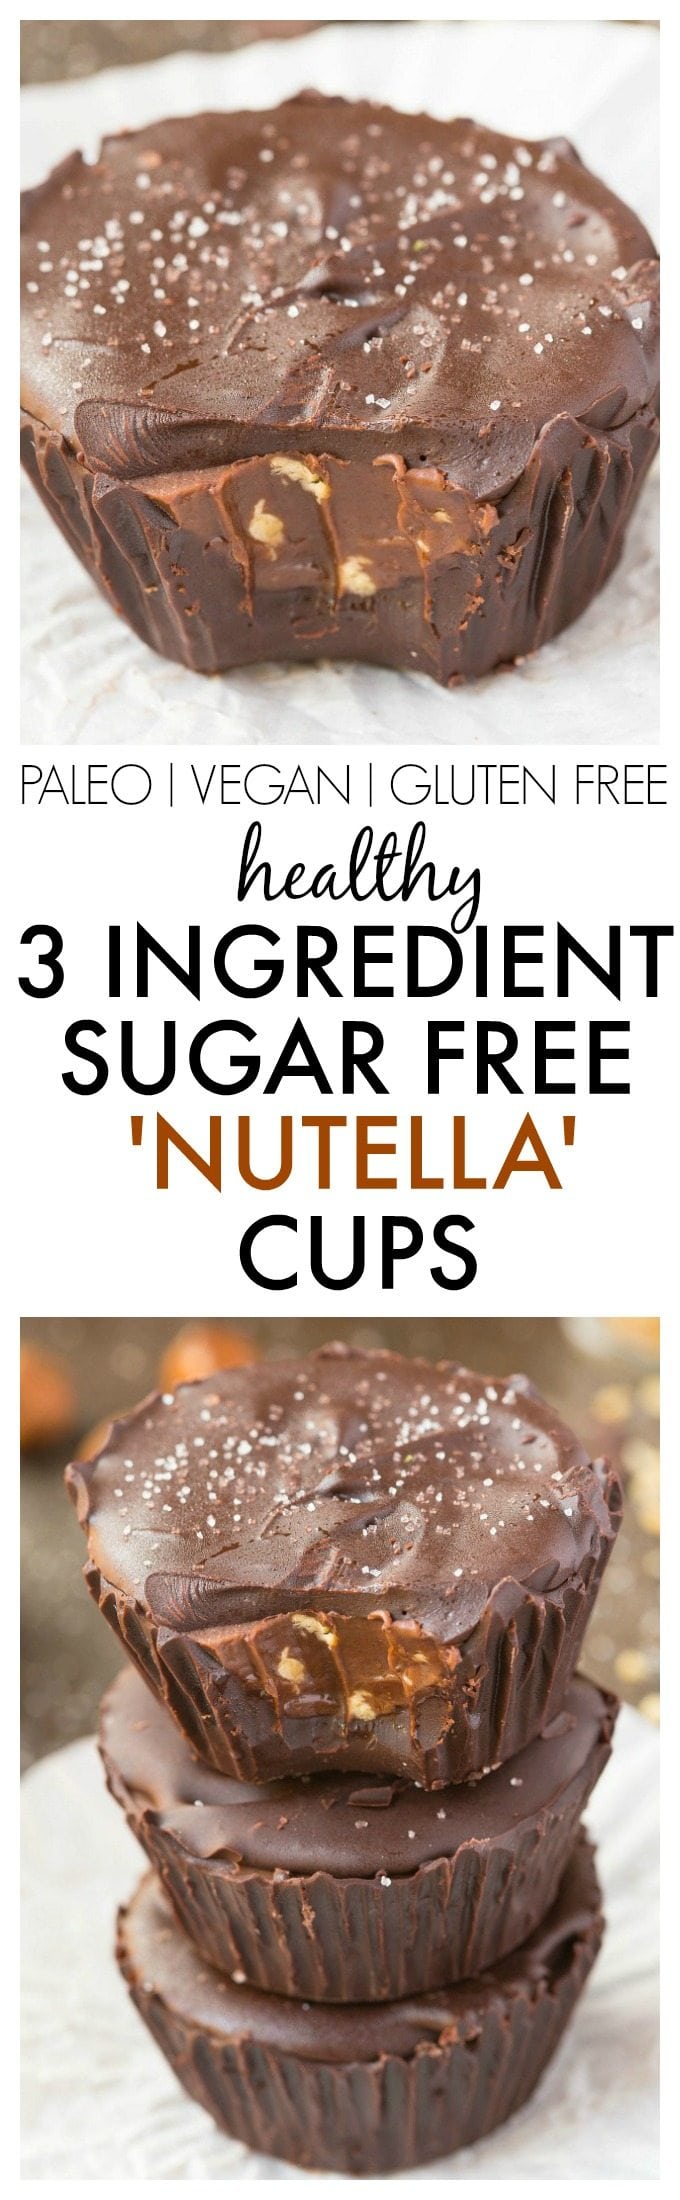 Healthy 3 Ingredient 'Nutella' Cups made with NO sugar, NO dairy and ridiculously easy AND delicious! {vegan, gluten free, paleo recipe}- thebigmansworld.com